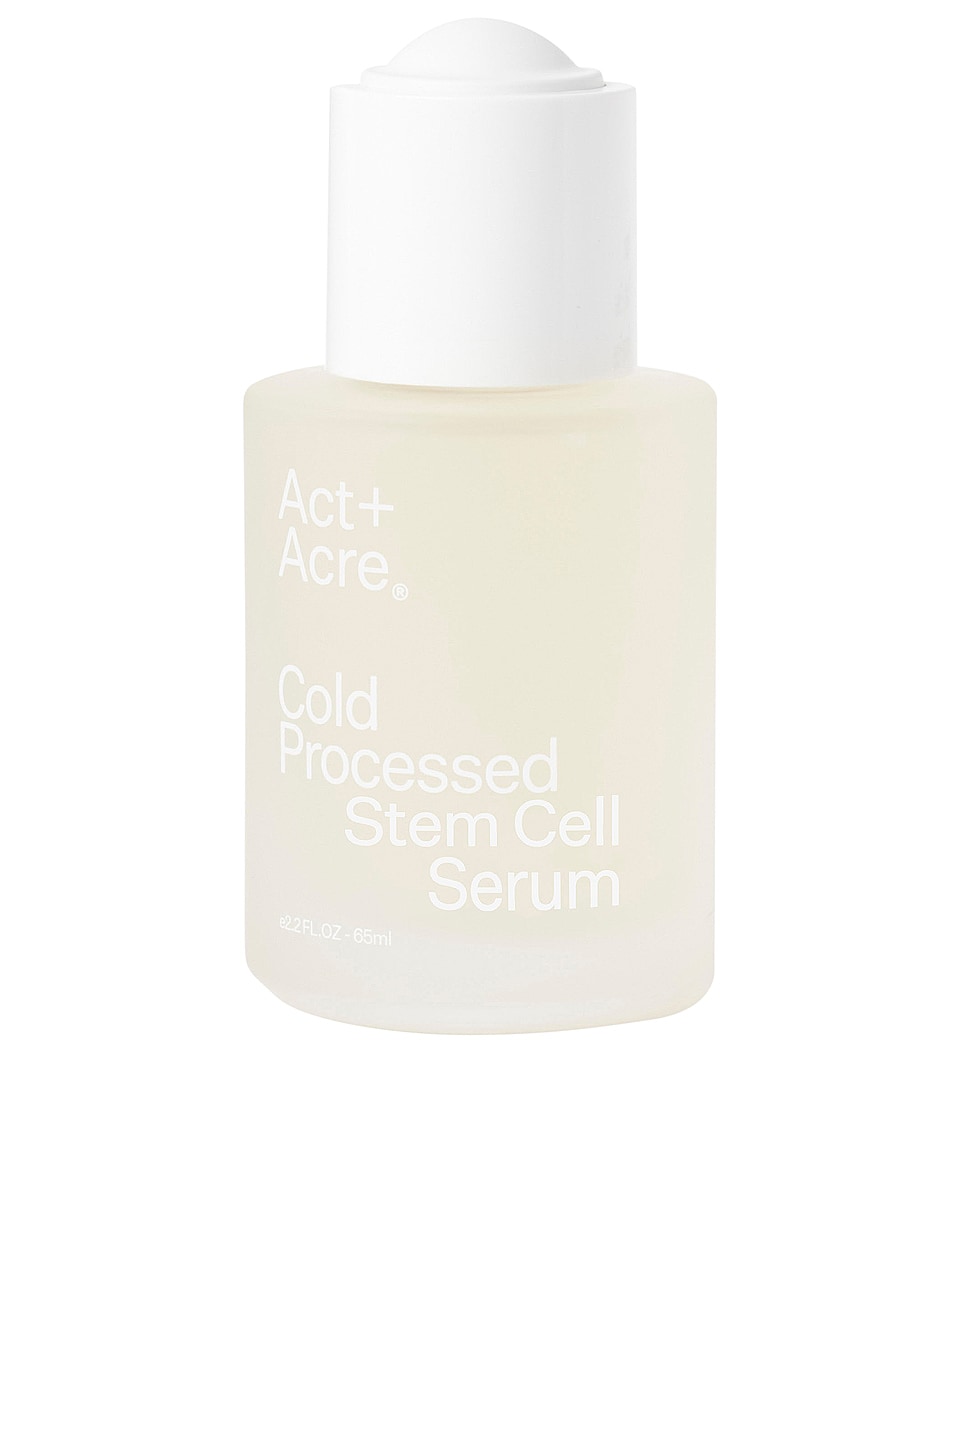 Act+Acre Cold Processed Stem Cell Serum | REVOLVE